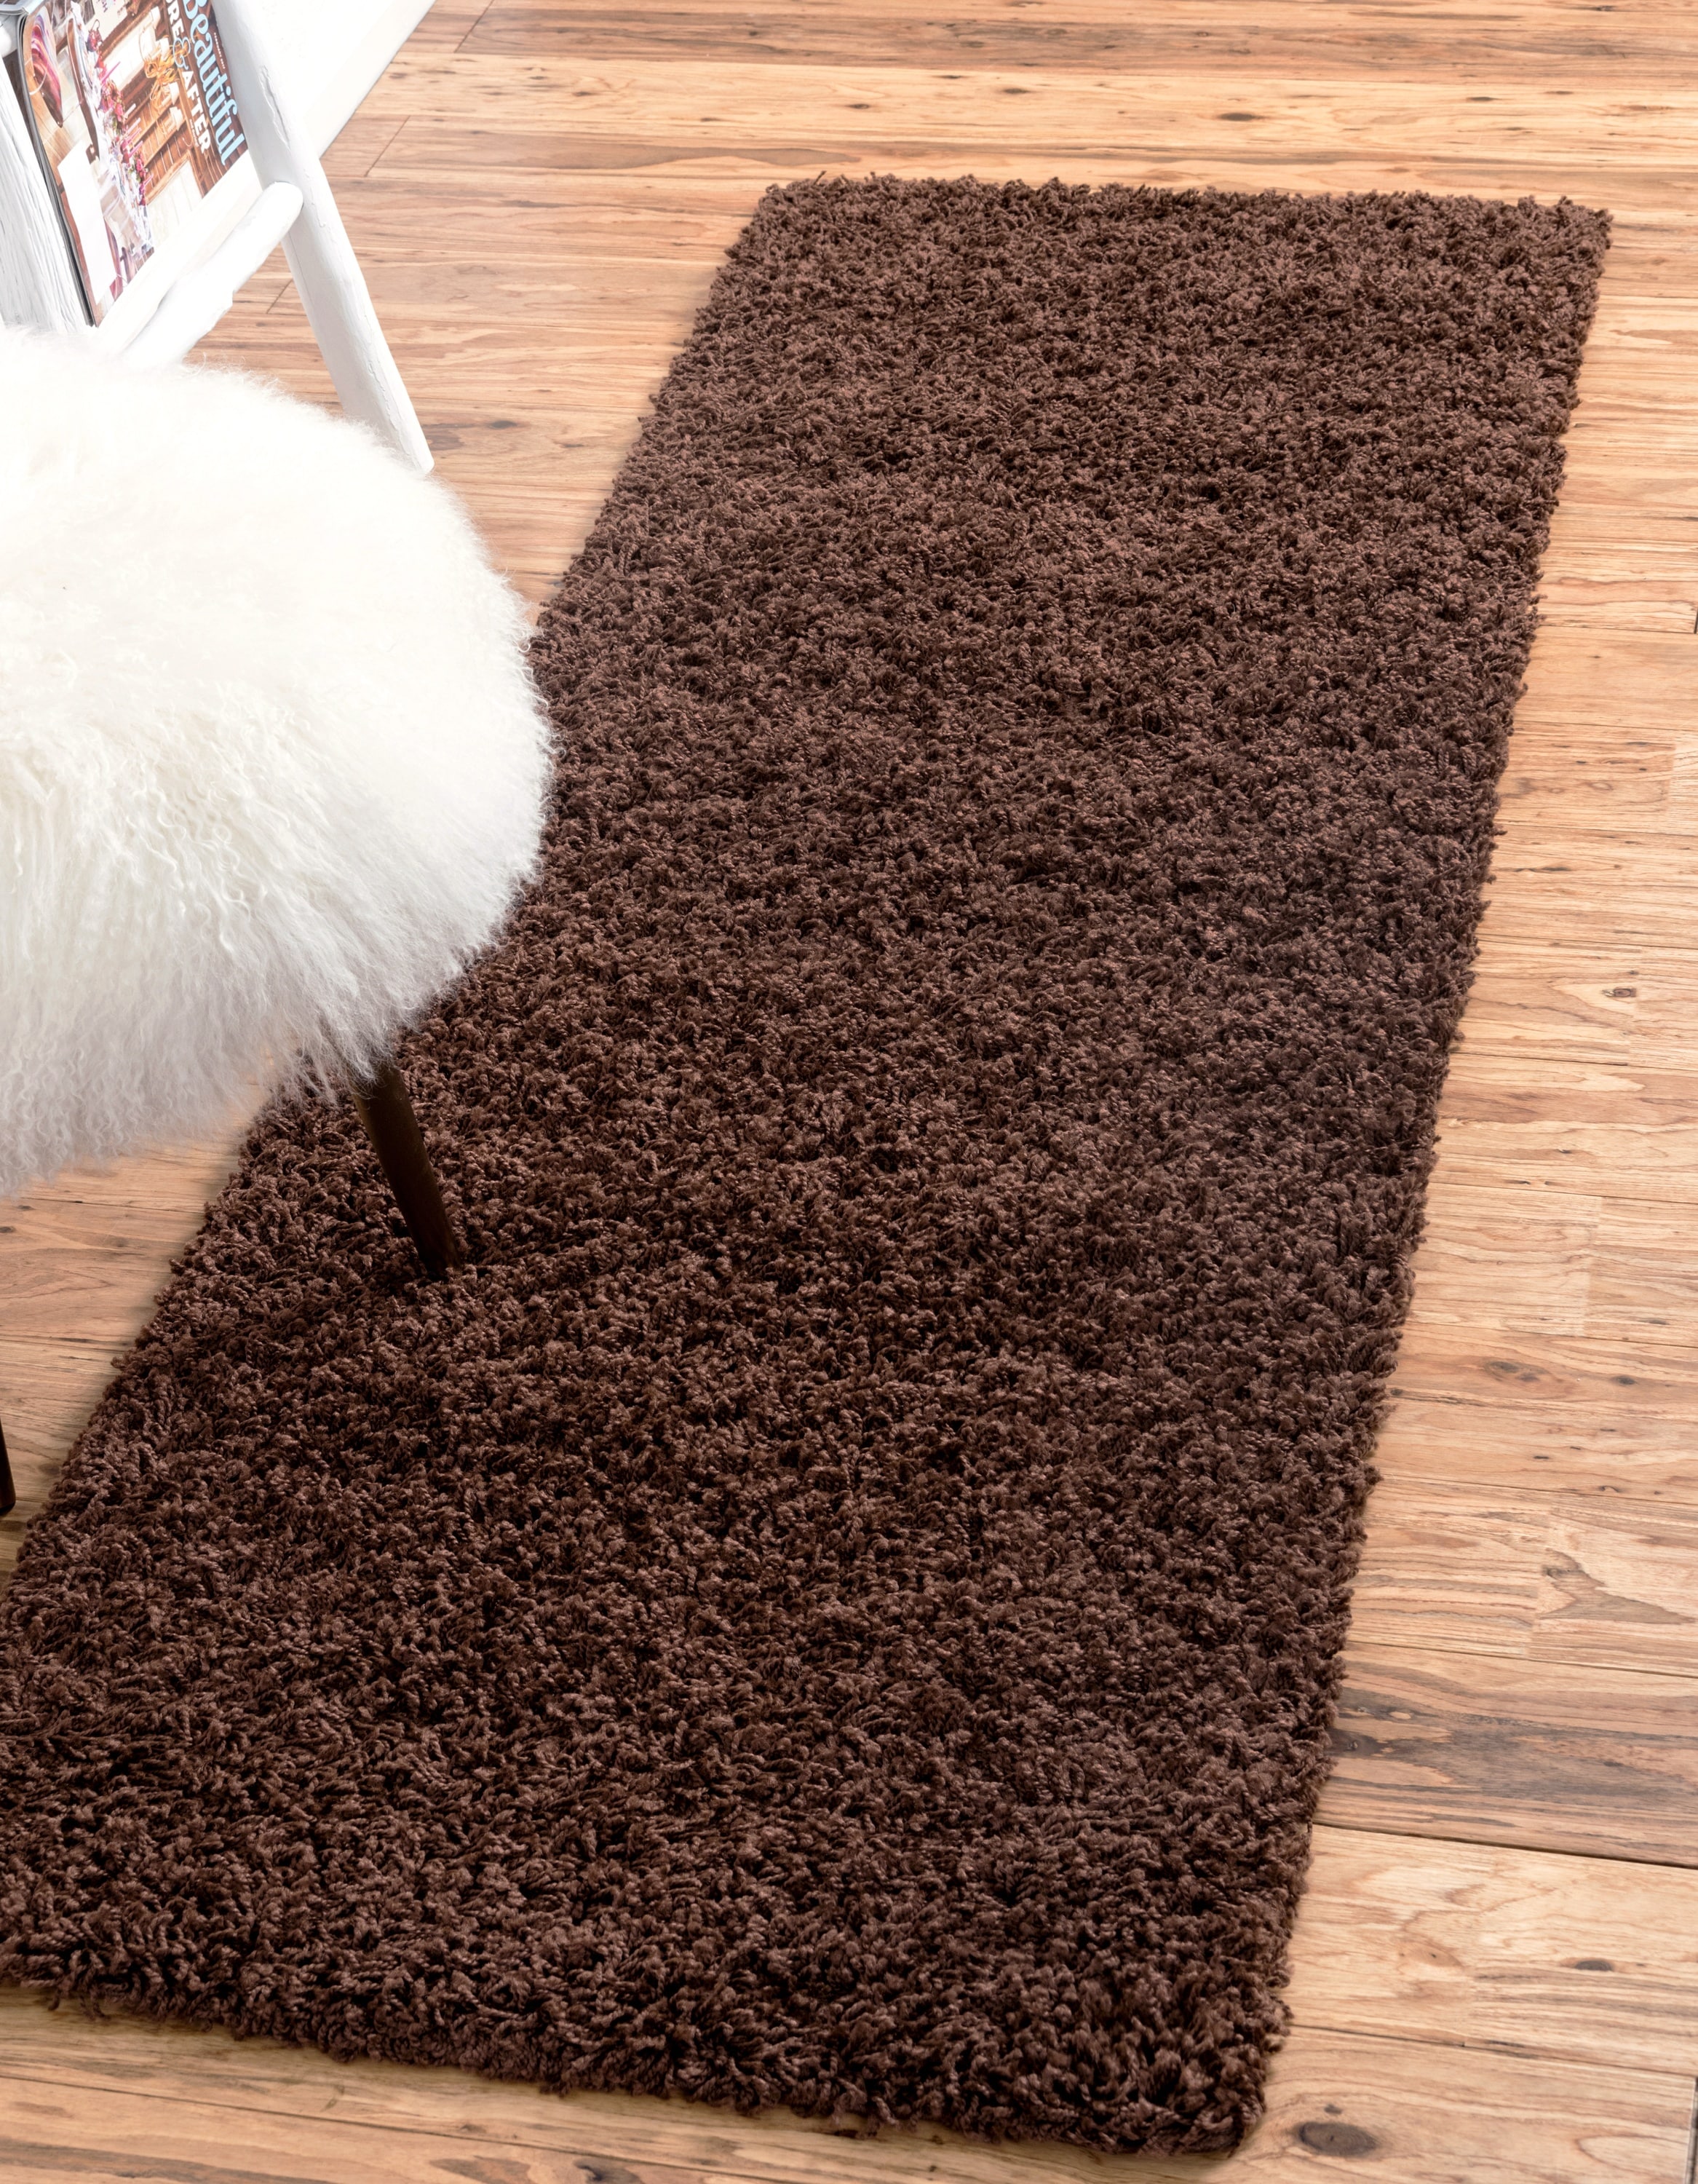 These Washable, Pet-Friendly Rugs Start At Just $37